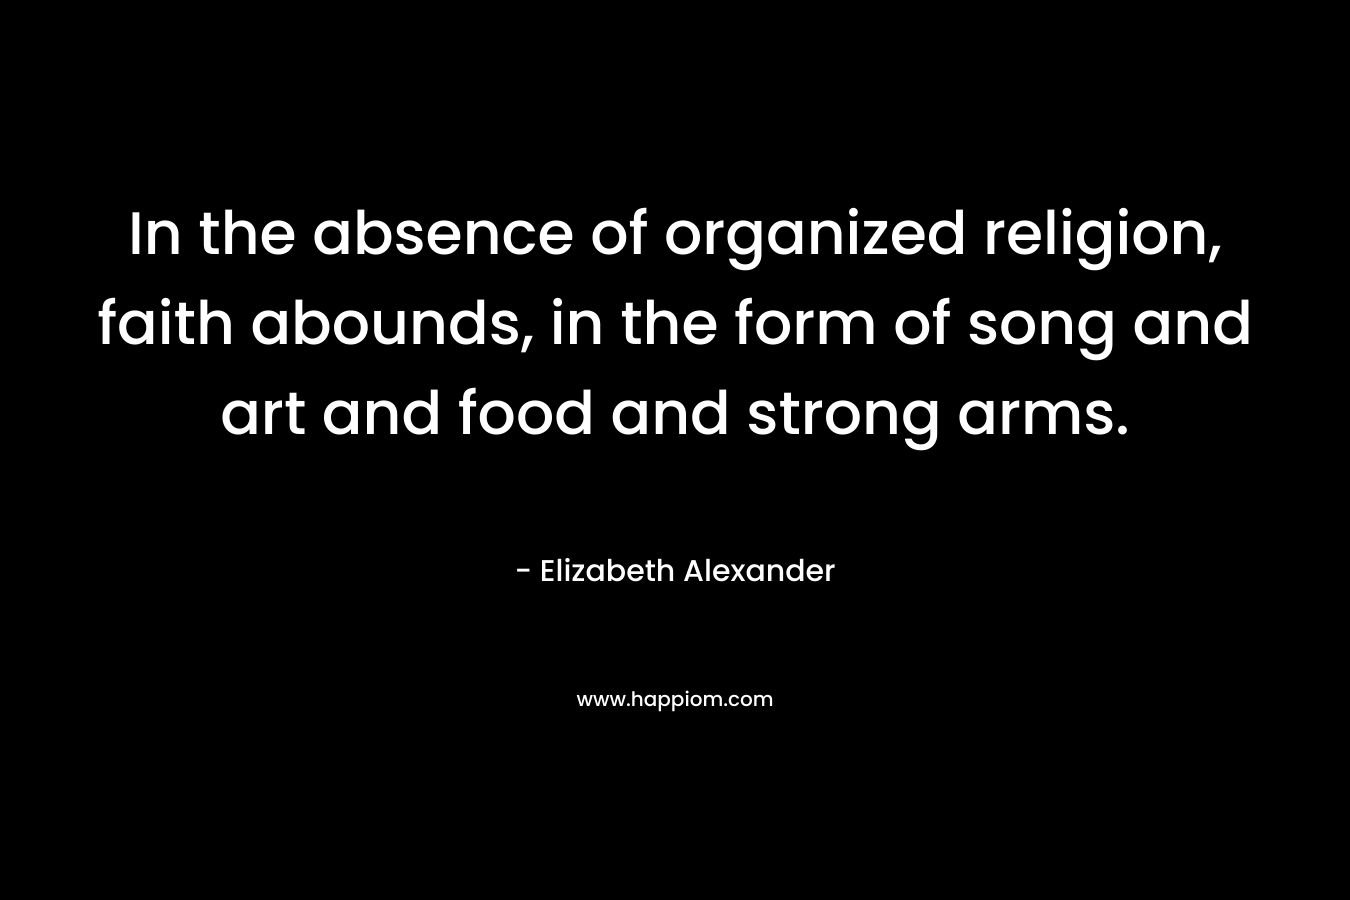 In the absence of organized religion, faith abounds, in the form of song and art and food and strong arms.